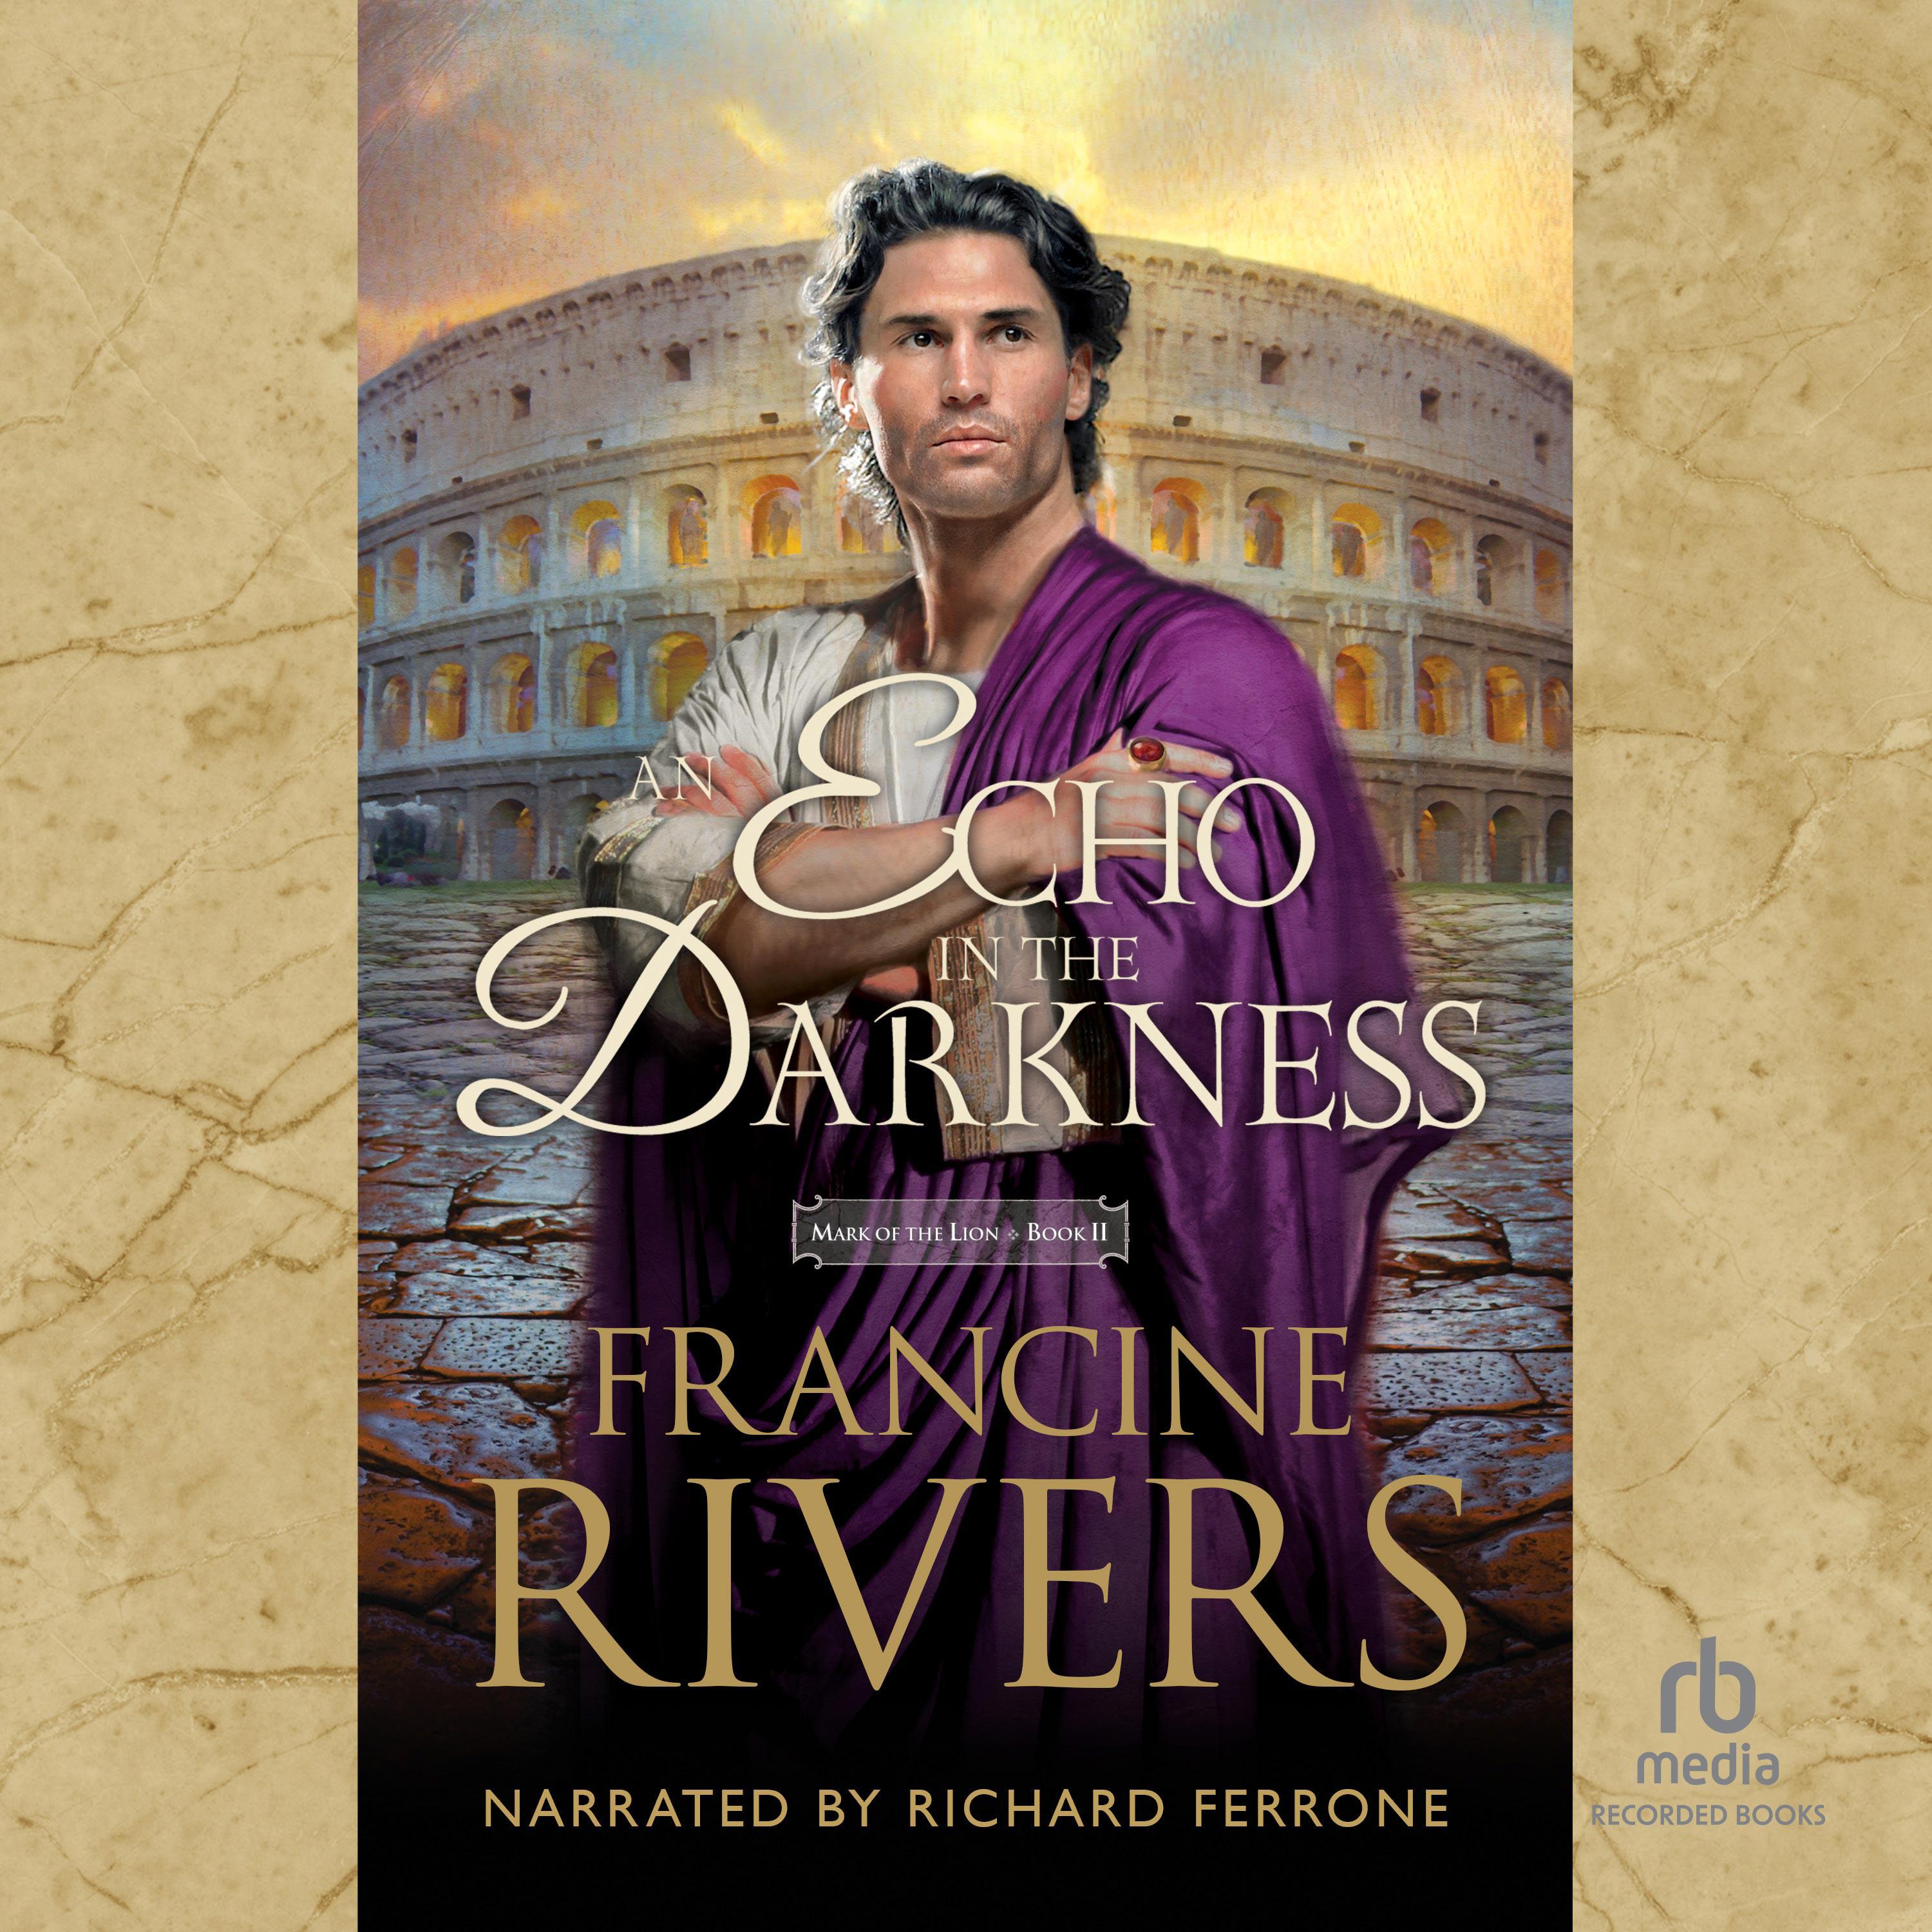 an echo in the darkness by francine rivers